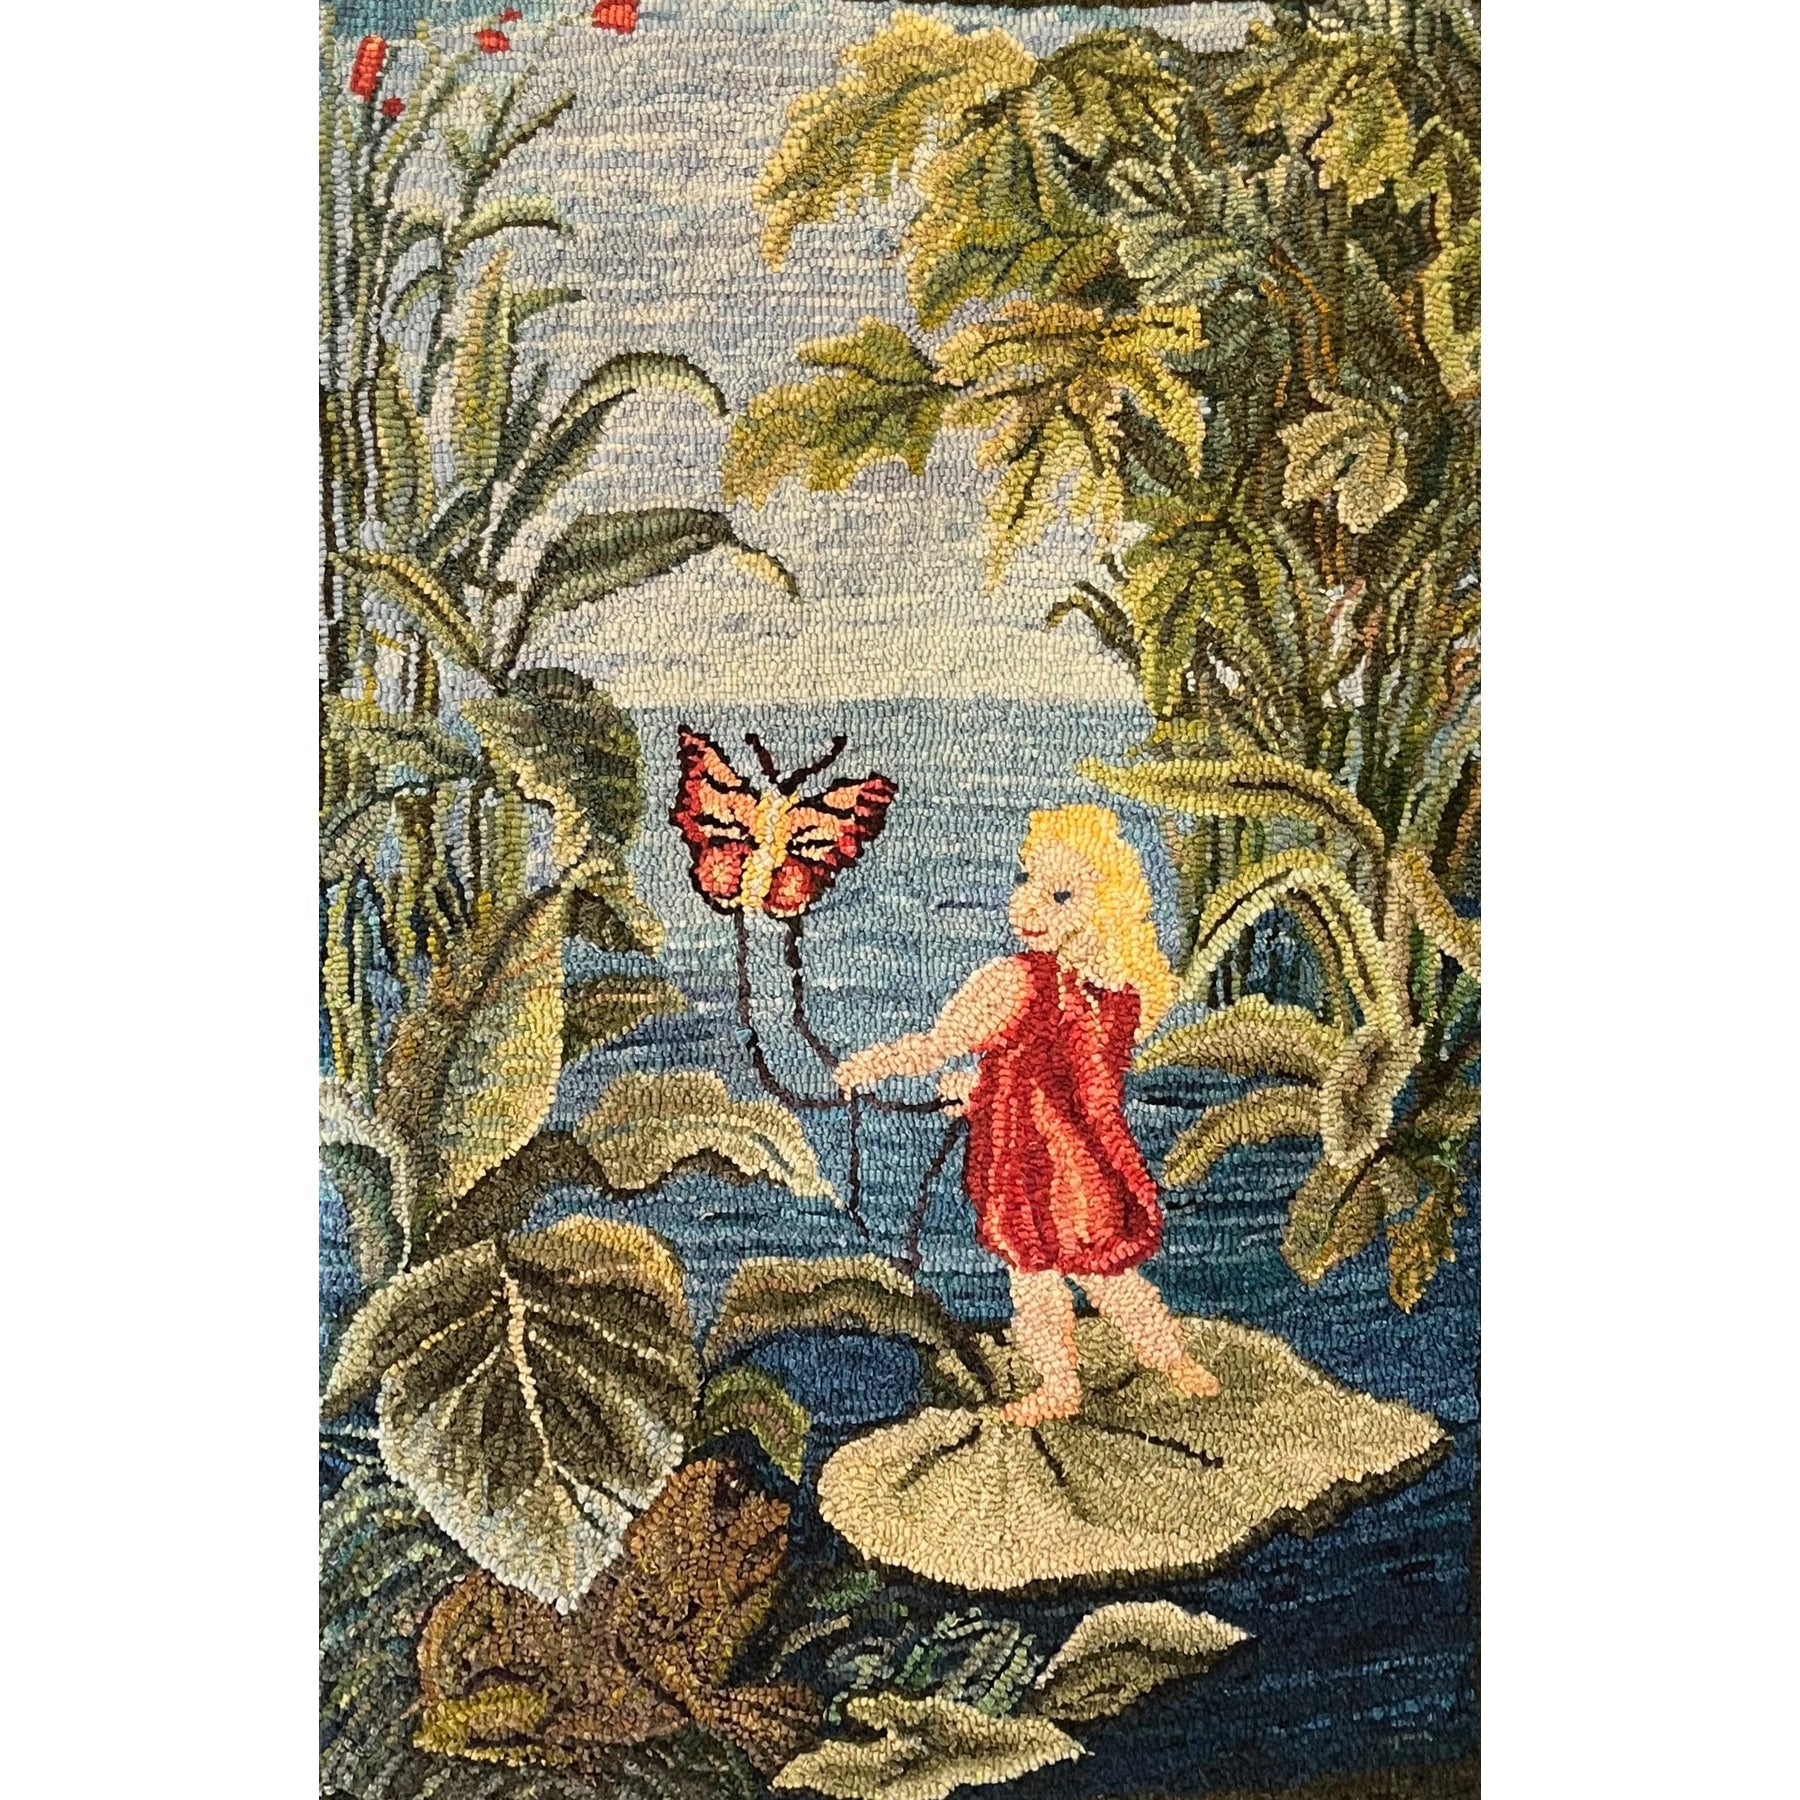 Thumbelina on Water with Butterfly, Tommelise By, Hans Christian Andersen, Oleograph, 1883, rug hooked by Judith Hotchkiss